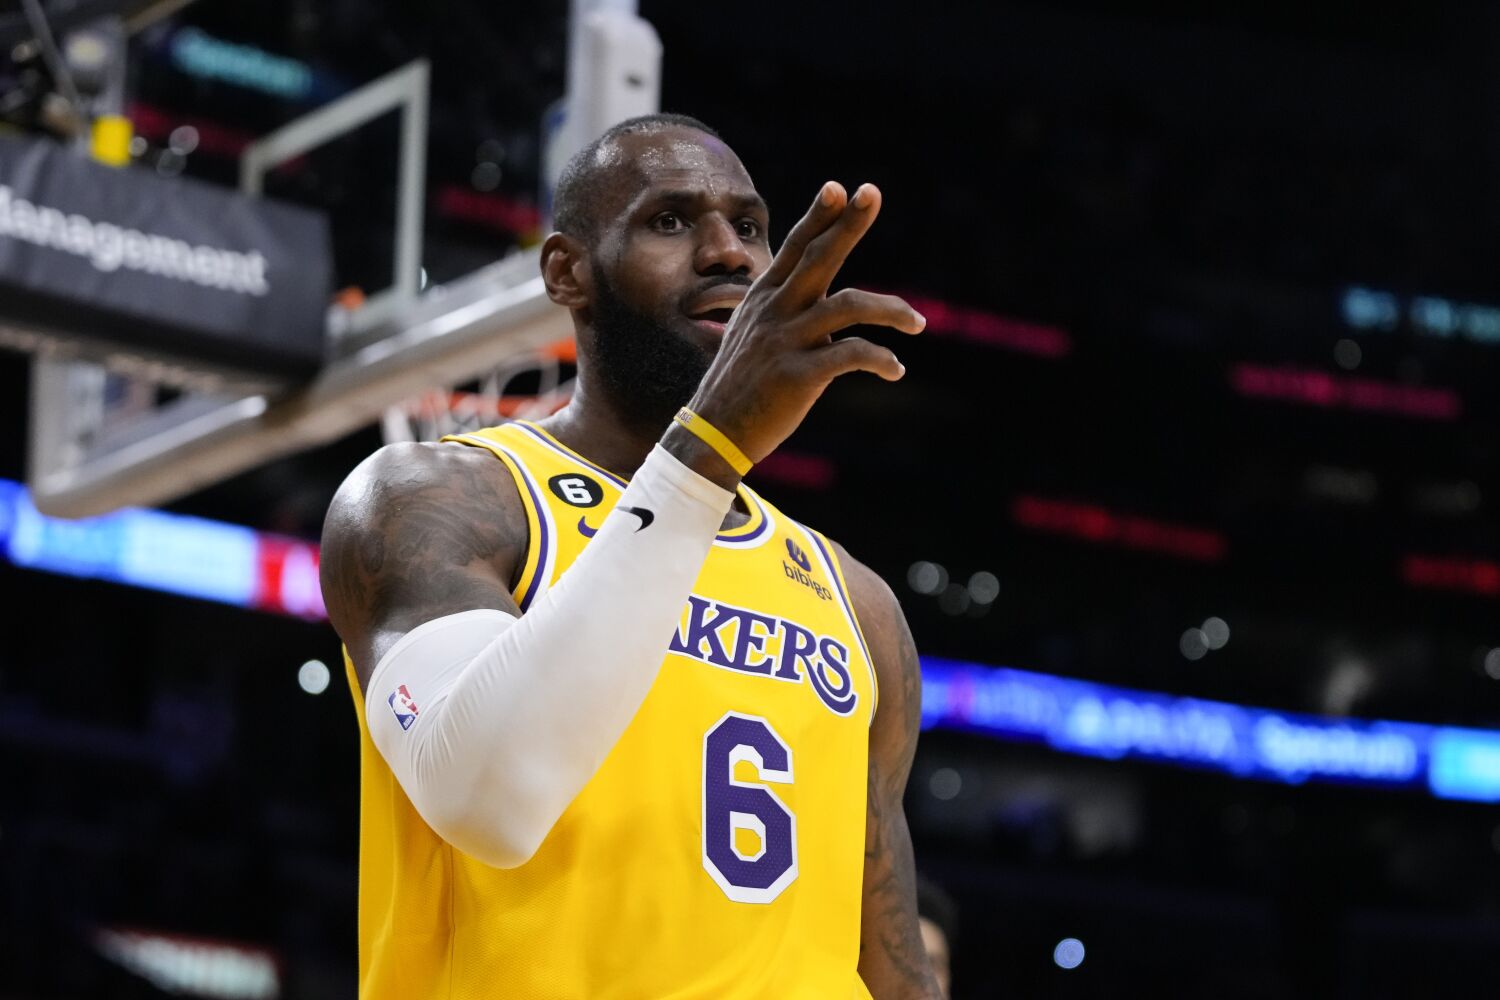 Lakers star LeBron James proves again Monday that he can defy time